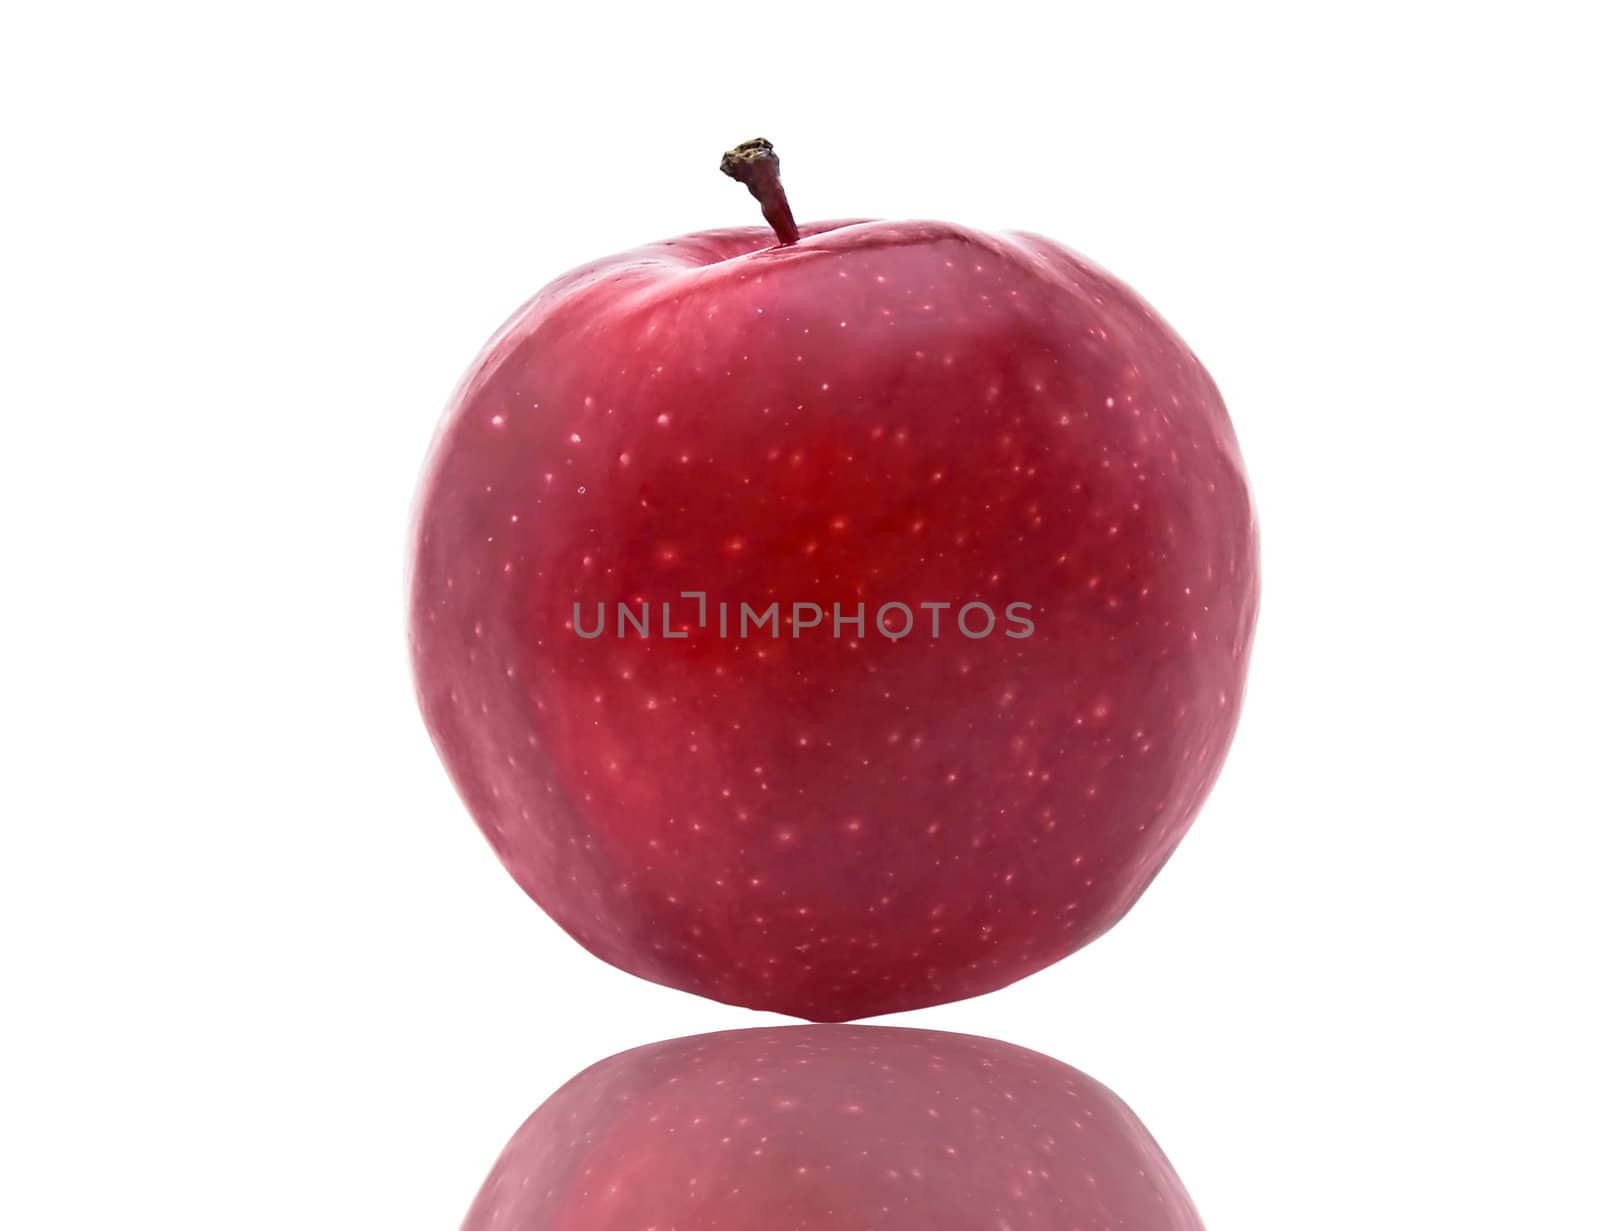 Dark-red apple. Isolated on a white background